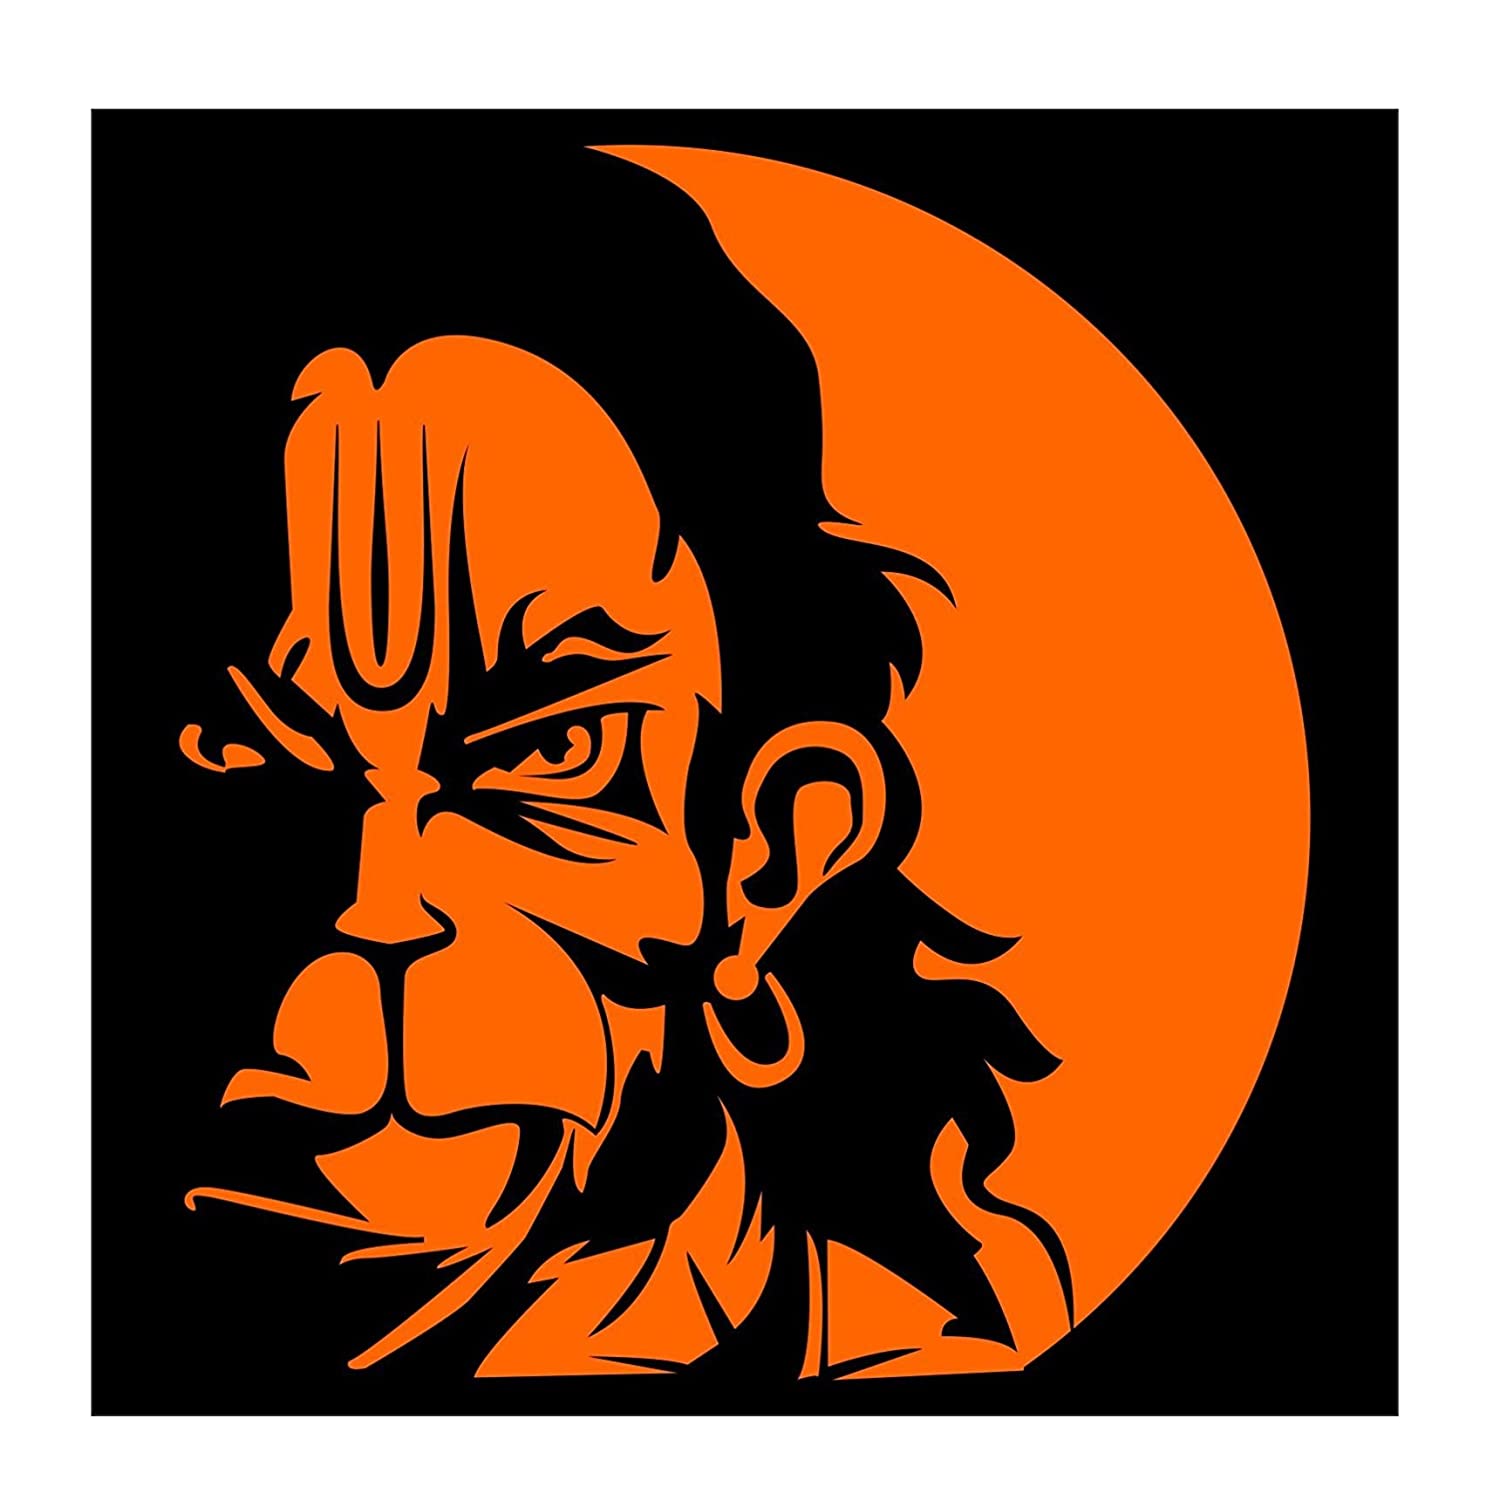 bajrang sticker, bajrang visor sticker,bajrang logo sticker,bajrang bike sticker,bajrang car sticker,bajrang logo sticker,bajrang bali sticker, bajrang bali visor sticker,bajrang bali logo sticker,bajrang bali bike sticker,bajrang bali car sticker,bajrang graphics, bajrang visor graphics,bajrang logo graphics,bajrang bike graphics,bajrang car graphics,bajrang logo graphics,bajrang bali graphics, bajrang bali visor graphics,bajrang bali logo graphics,bajrang bali bike graphics,bajrang bali car graphics,bajrang decal, bajrang visor decal,bajrang logo decal,bajrang bike decal,bajrang car decal,bajrang logo decal,bajrang bali decal, bajrang bali visor decal,bajrang bali logo decal,bajrang bali bike decal,bajrang bali car decal,